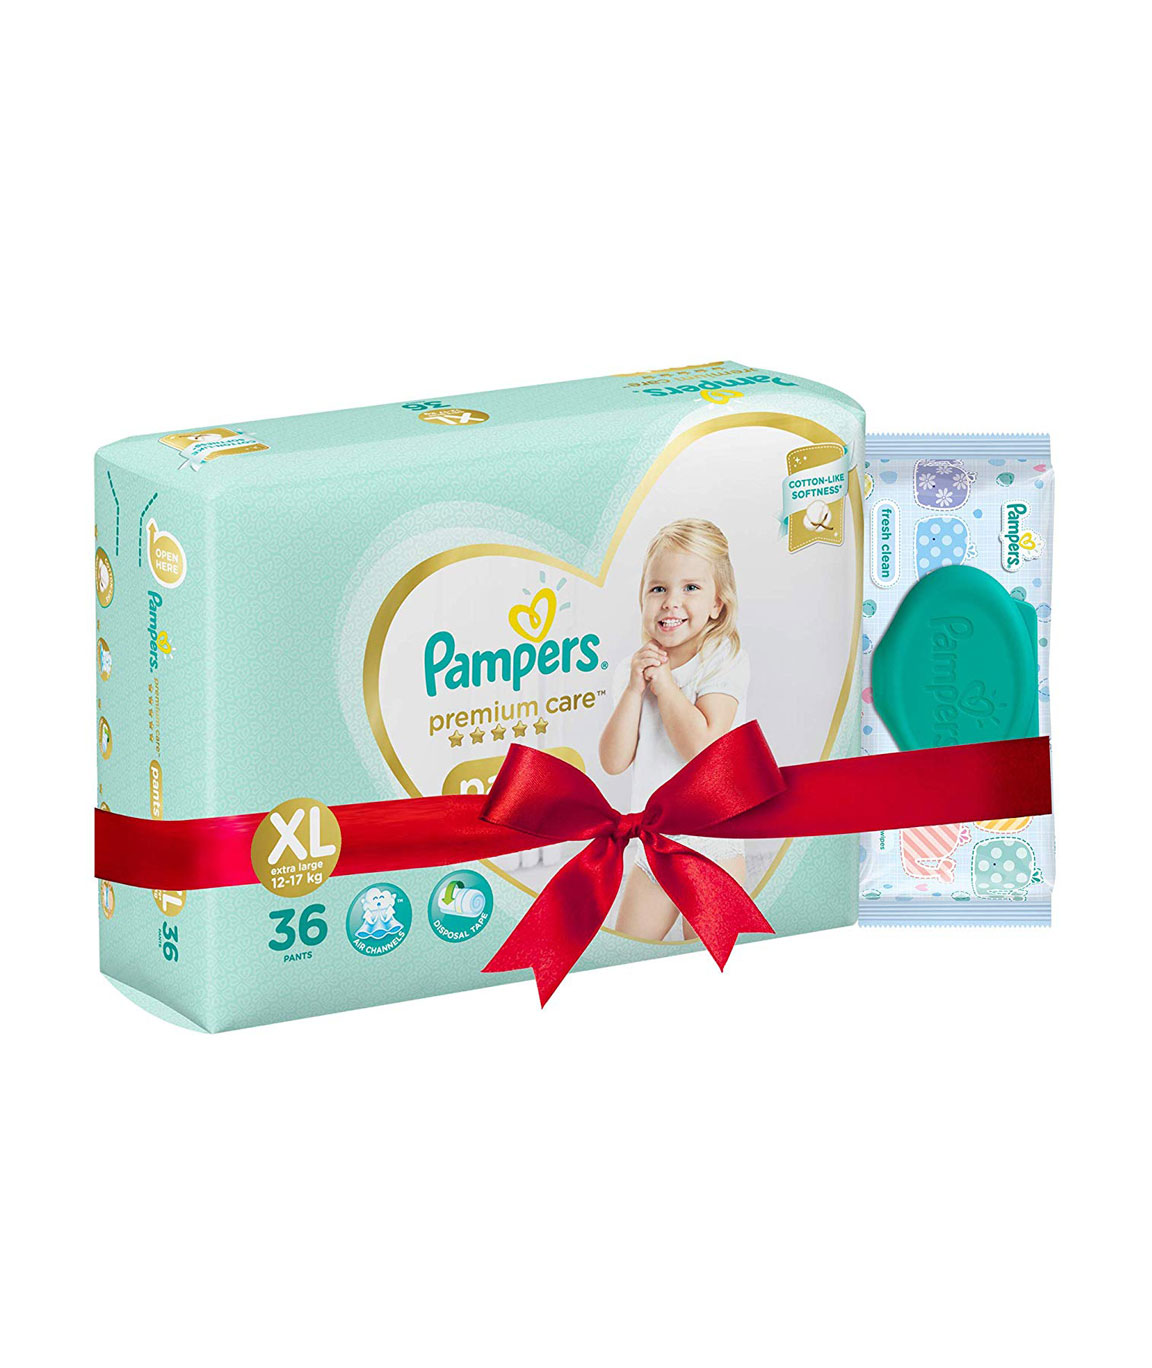 Pampers New Diaper Pants, XXX-Large (23 Count)